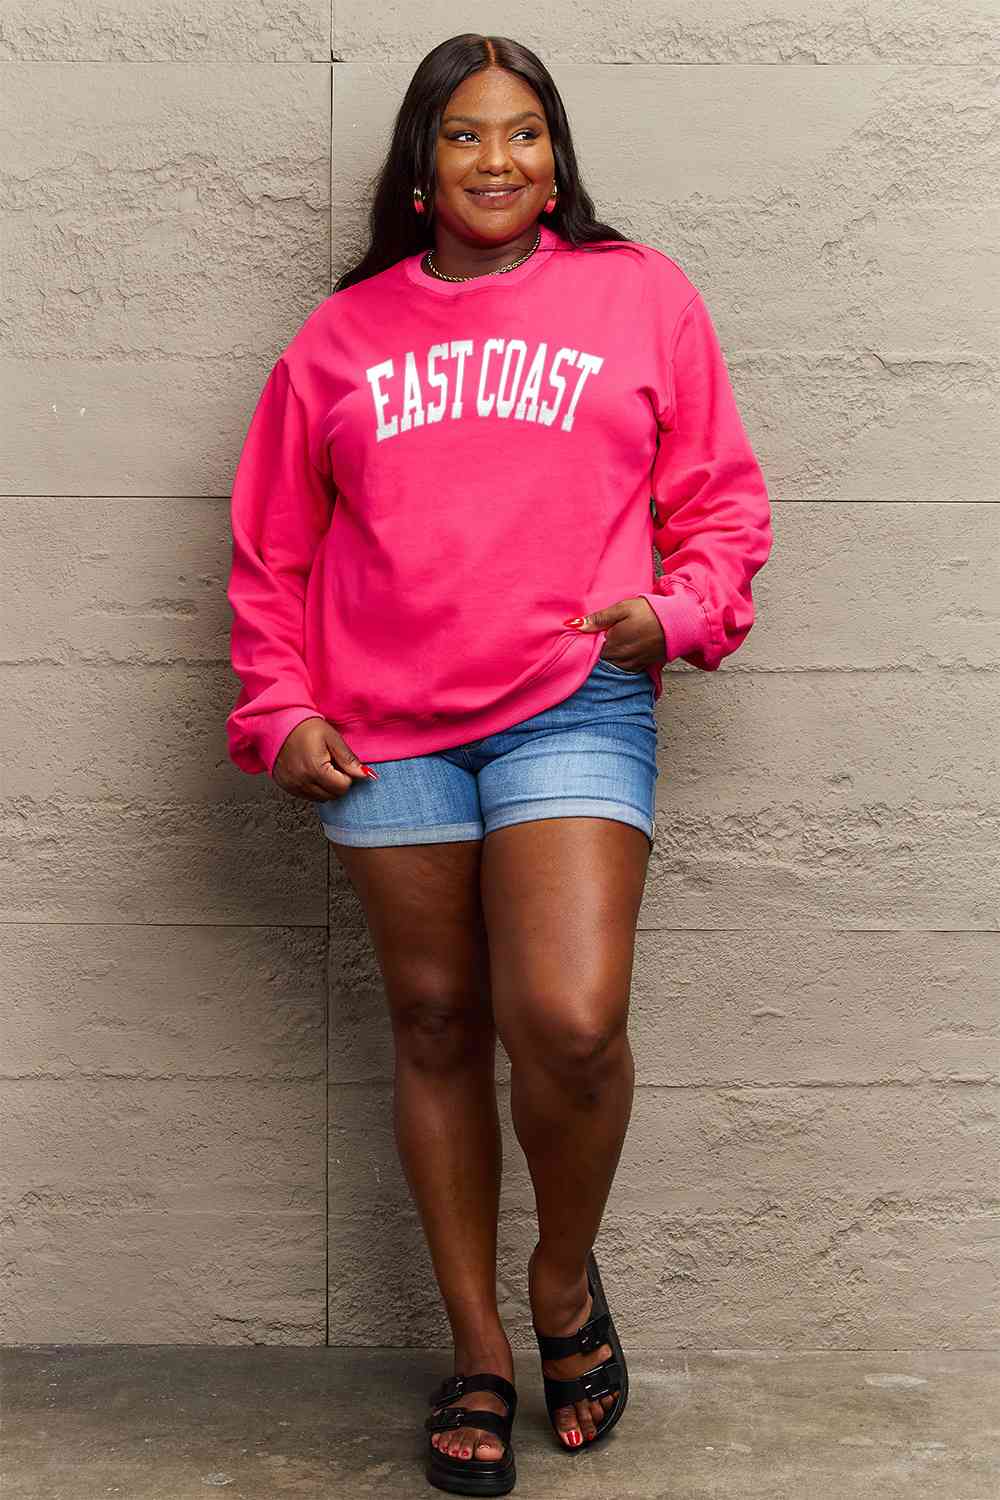 Simply Love Full Size EAST COAST Graphic Sweatshirt - By Baano